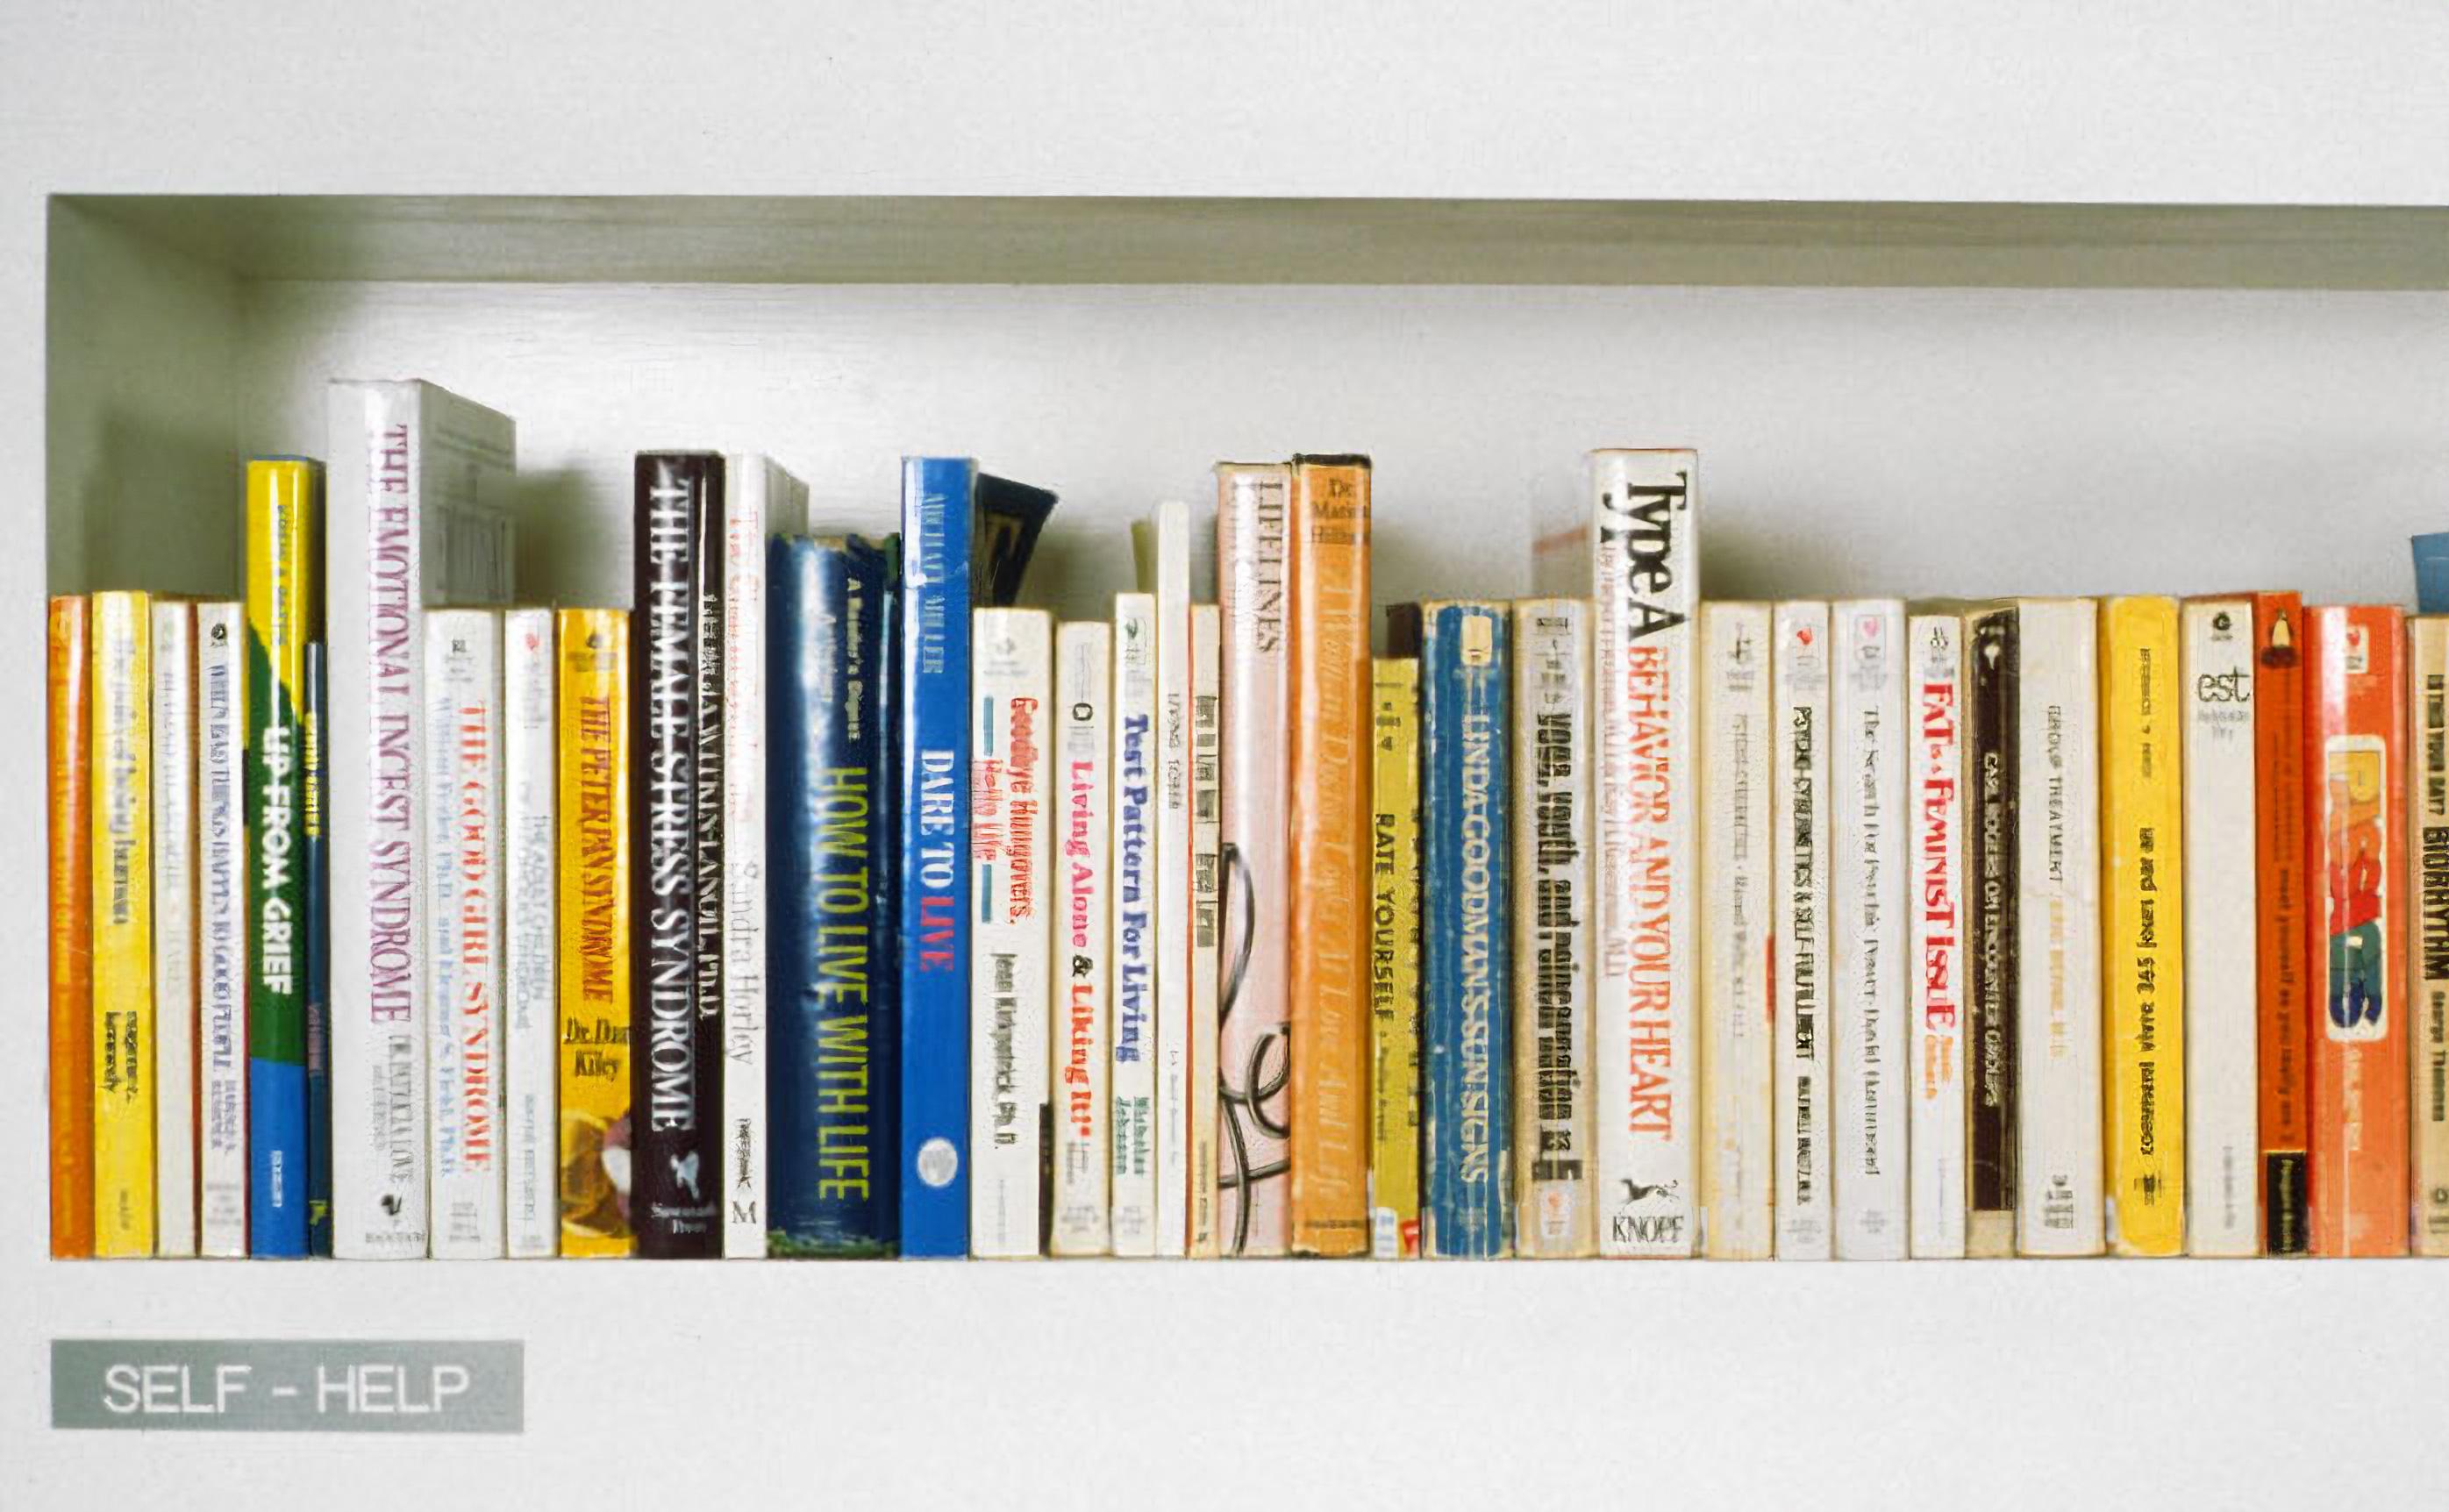 Self-Help Library, with Bob Flanagan: Visiting Hours, New Museum for Contemporary Art, New York, 1994